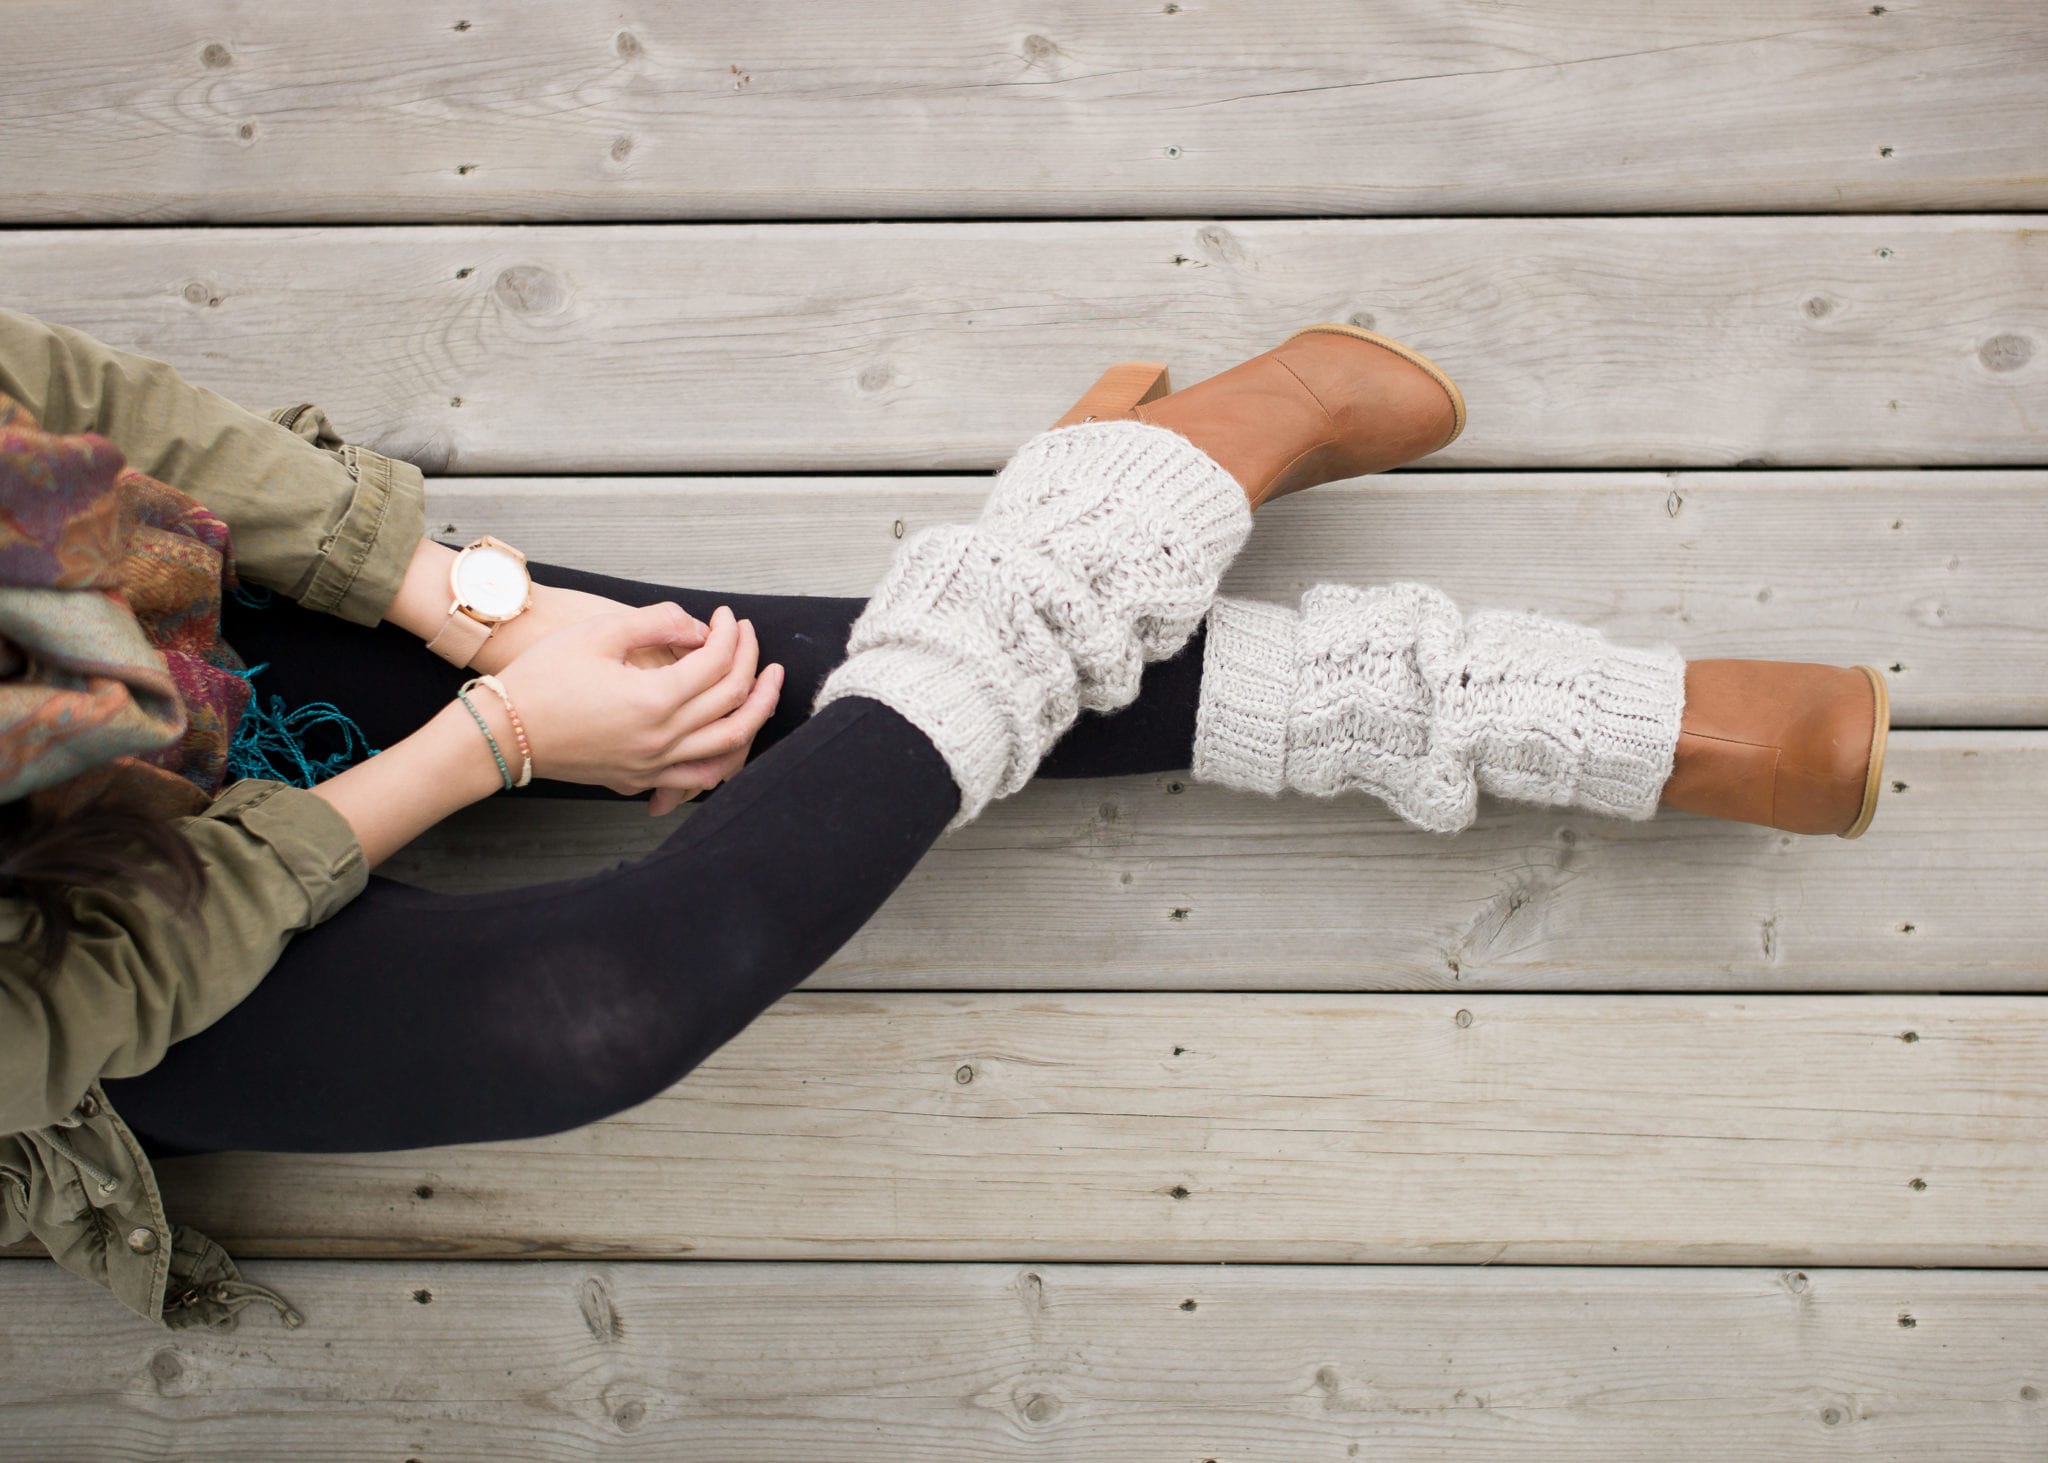 Cabled Legwarmers/Boot Cuffs - All About Ami